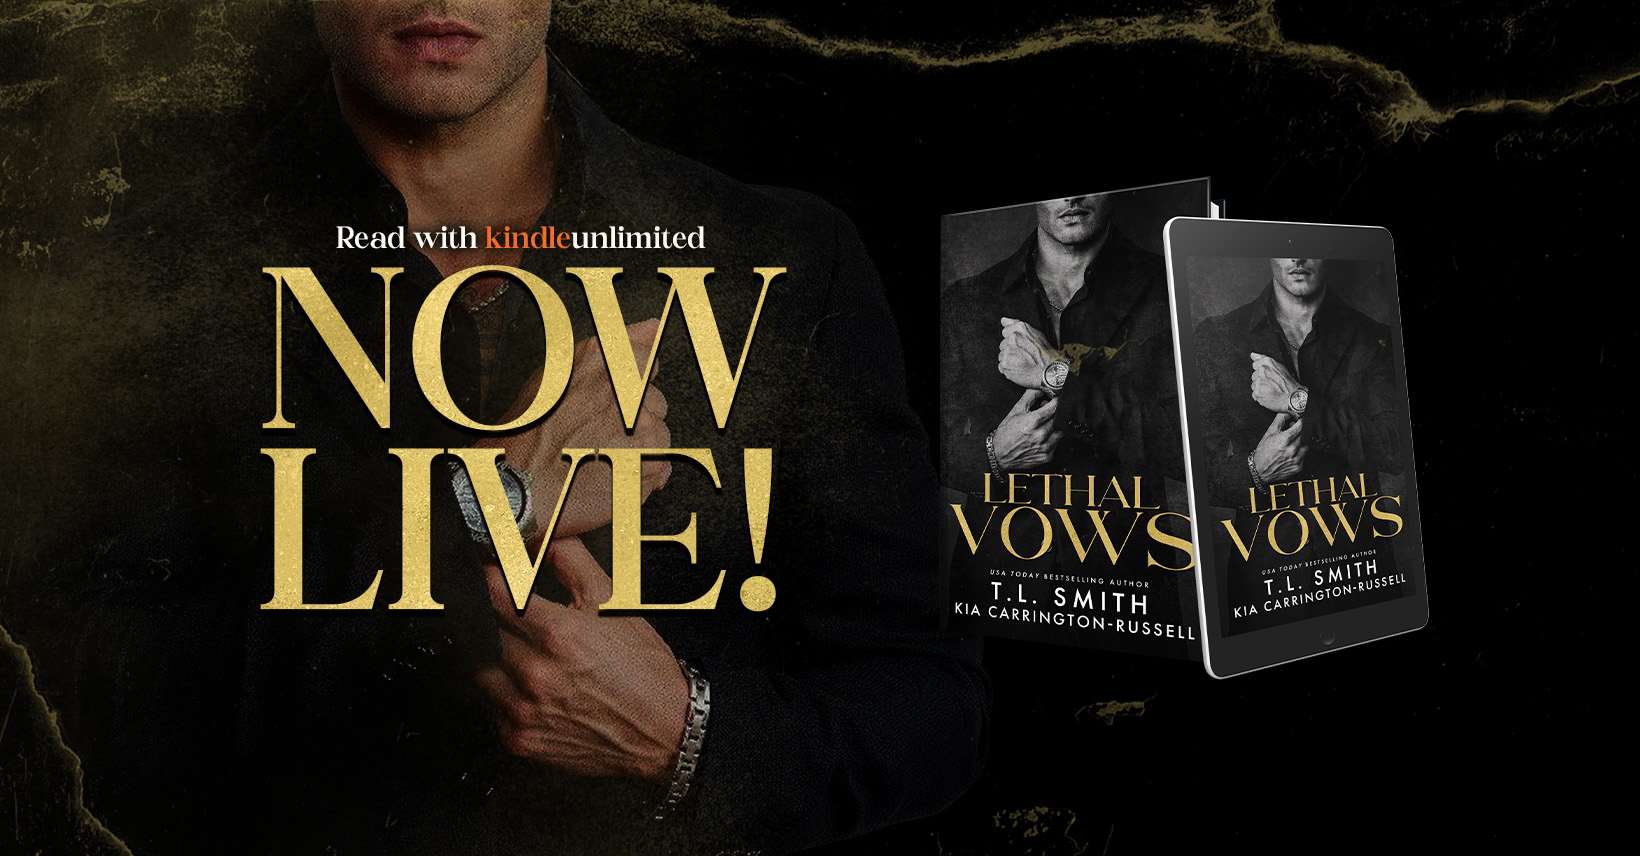 Enticing Journey Book Promotions - 🖤 𝗖𝗢𝗩𝗘𝗥 𝗥𝗘𝗩𝗘𝗔𝗟 🖤 Lethal Vows  byAuthor T.L Smith & Kia Carrington-Russell is releasing December 29th!  PreOrder →  Goodreads TBR  →